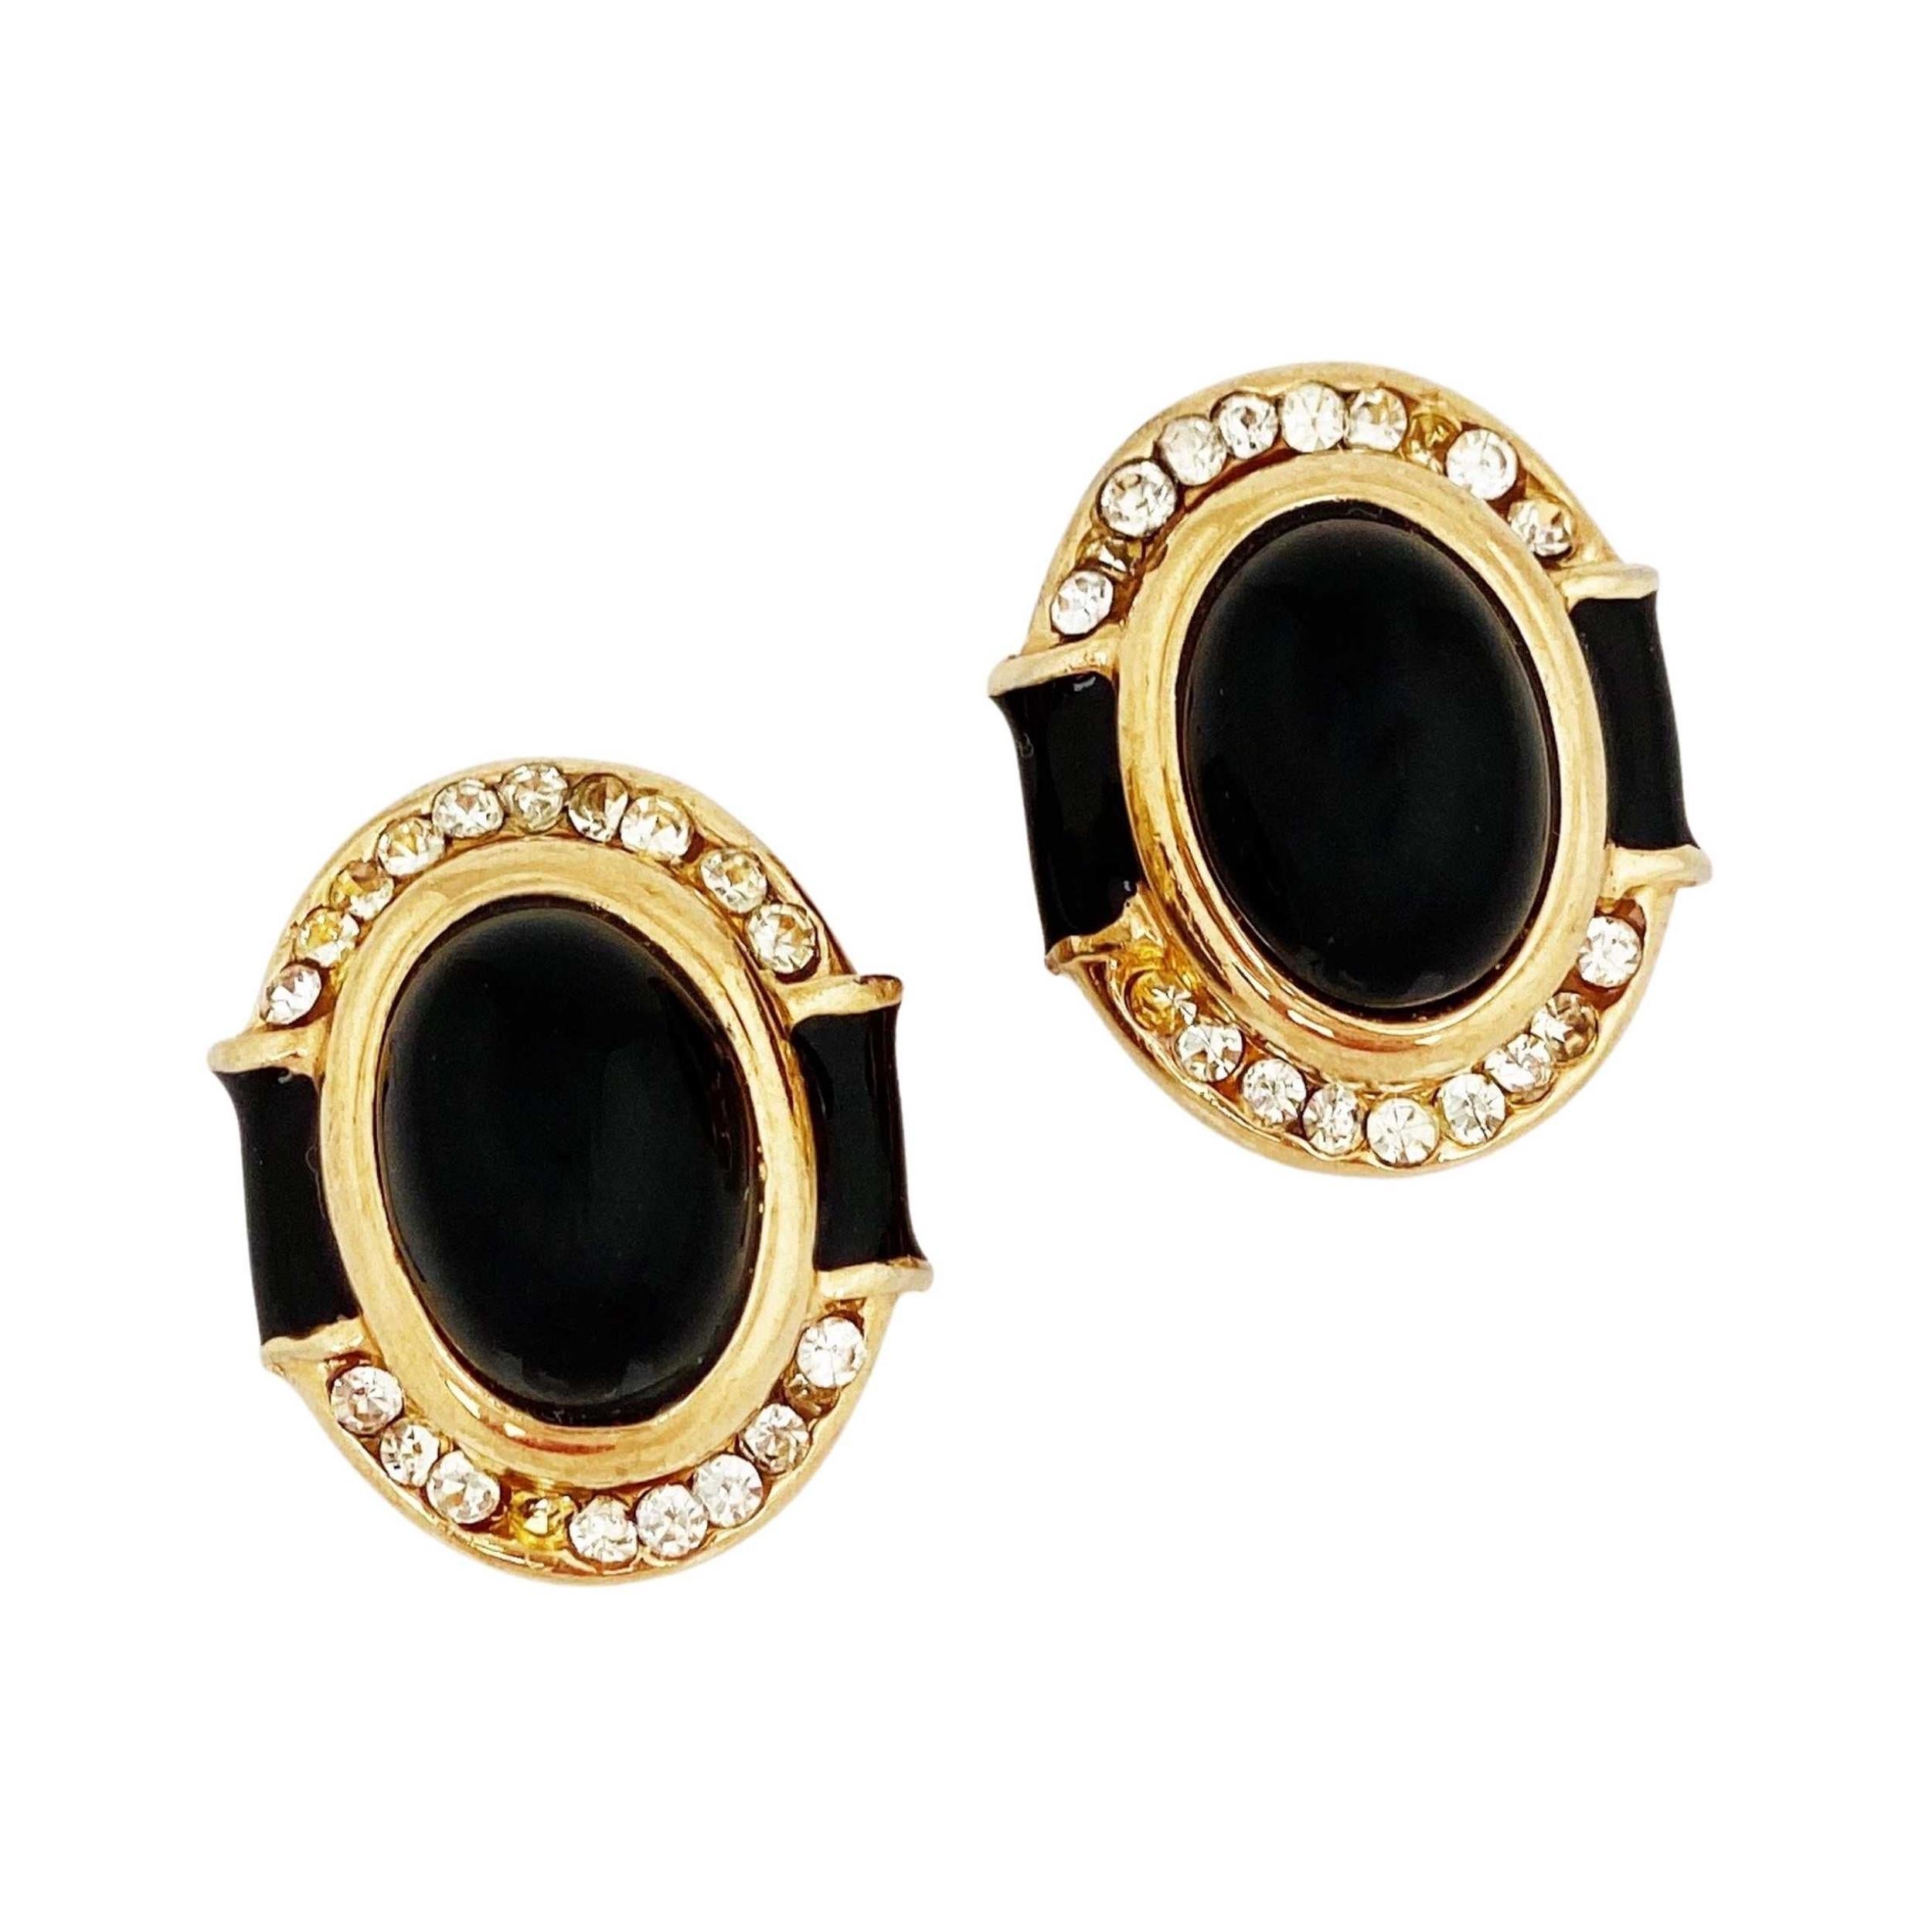 Gilt & Black Glass Cabochon Earrings with Crystal Accents by Bijoux Cascio For Sale